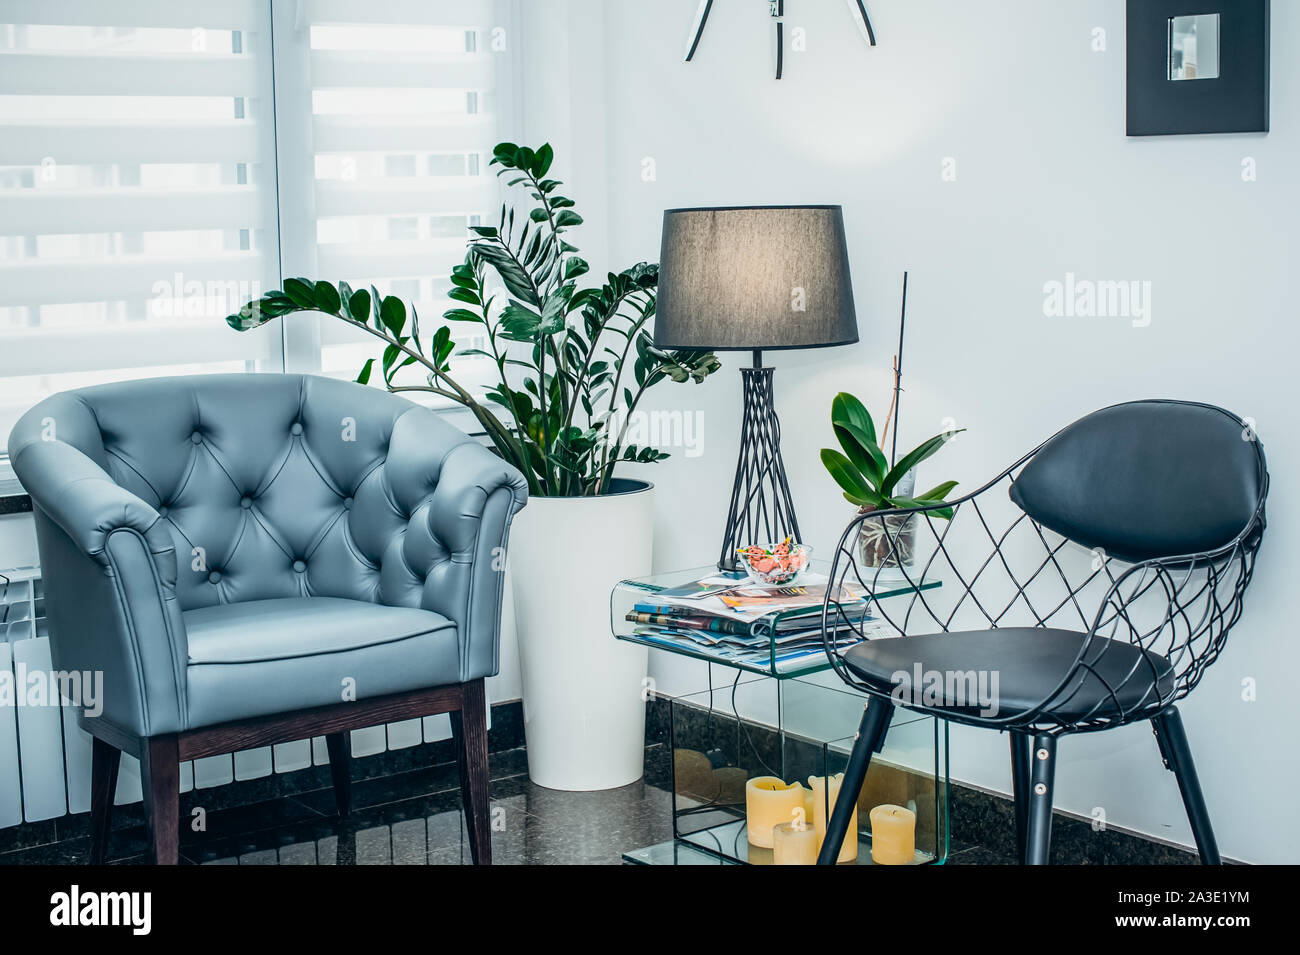 Stylish interior concept with white walls, gray and black modern chairs, lamp, coffee table and few potted green plants. Muted colors, geometrical sha Stock Photo